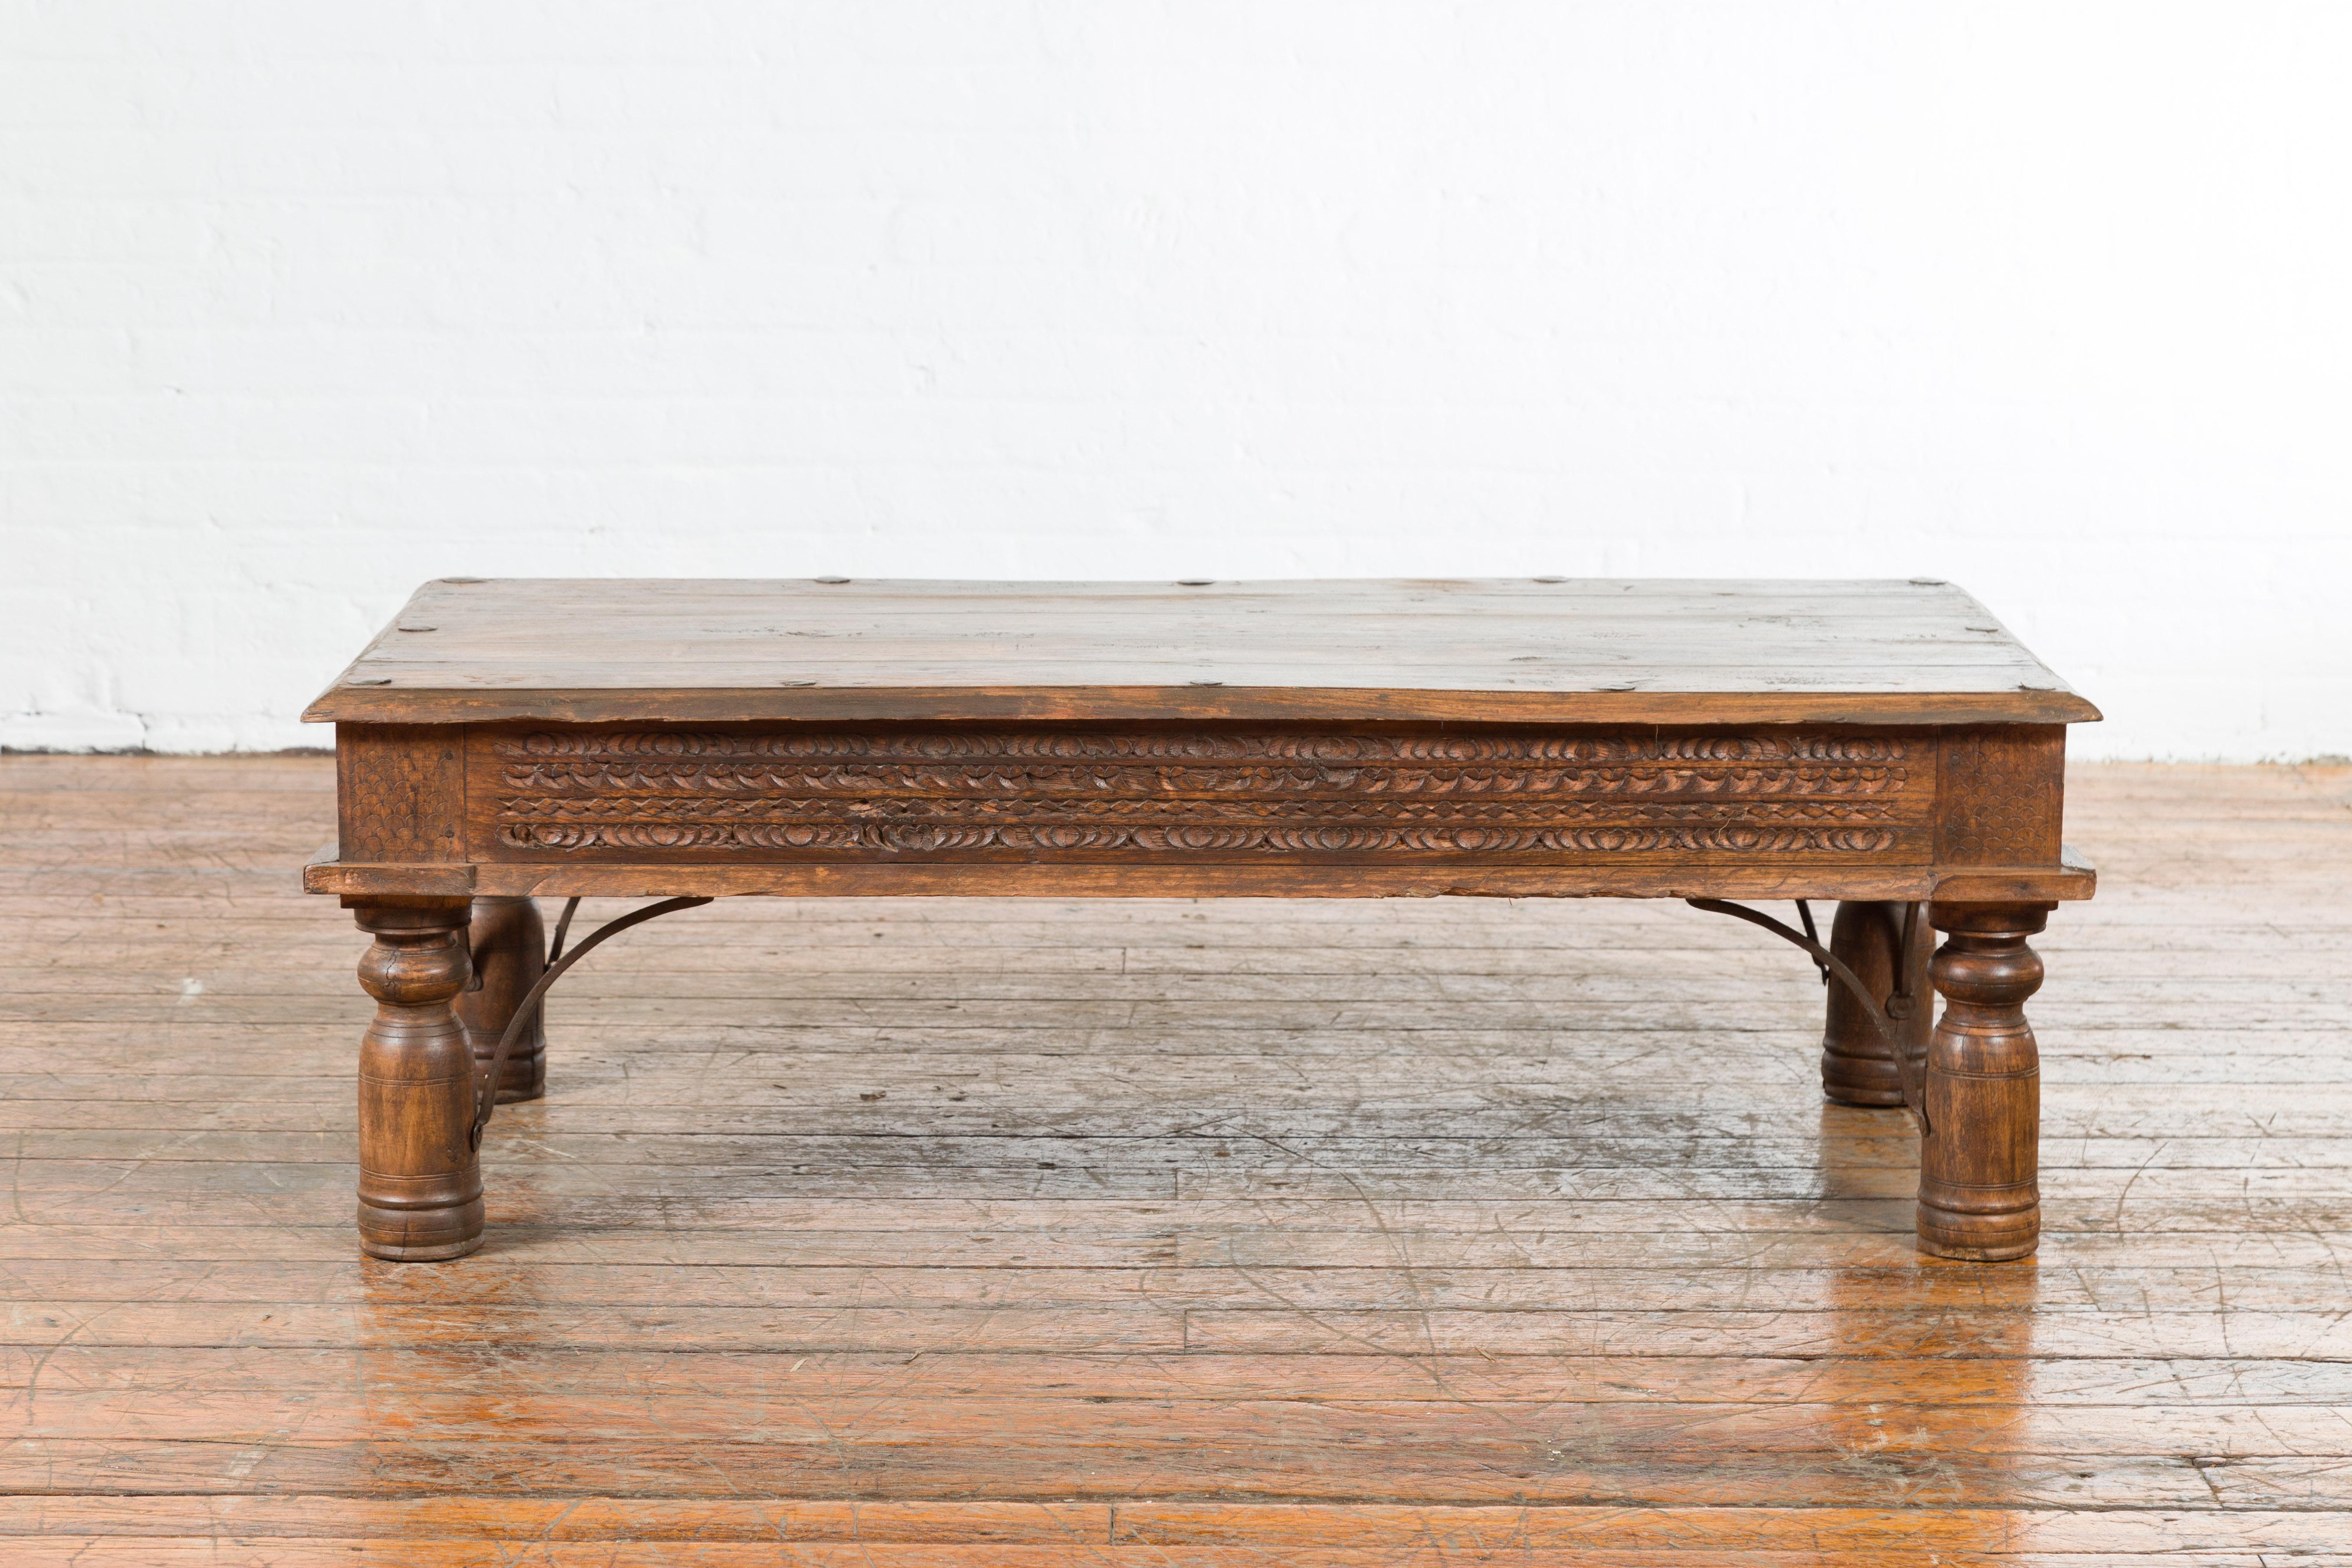 An Indian wooden coffee table from the 19th century, with carved apron, iron accents and baluster legs. Created in India during the 19th century, this coffee table features a rectangular planked top with iron nailheads, sitting above an elegant